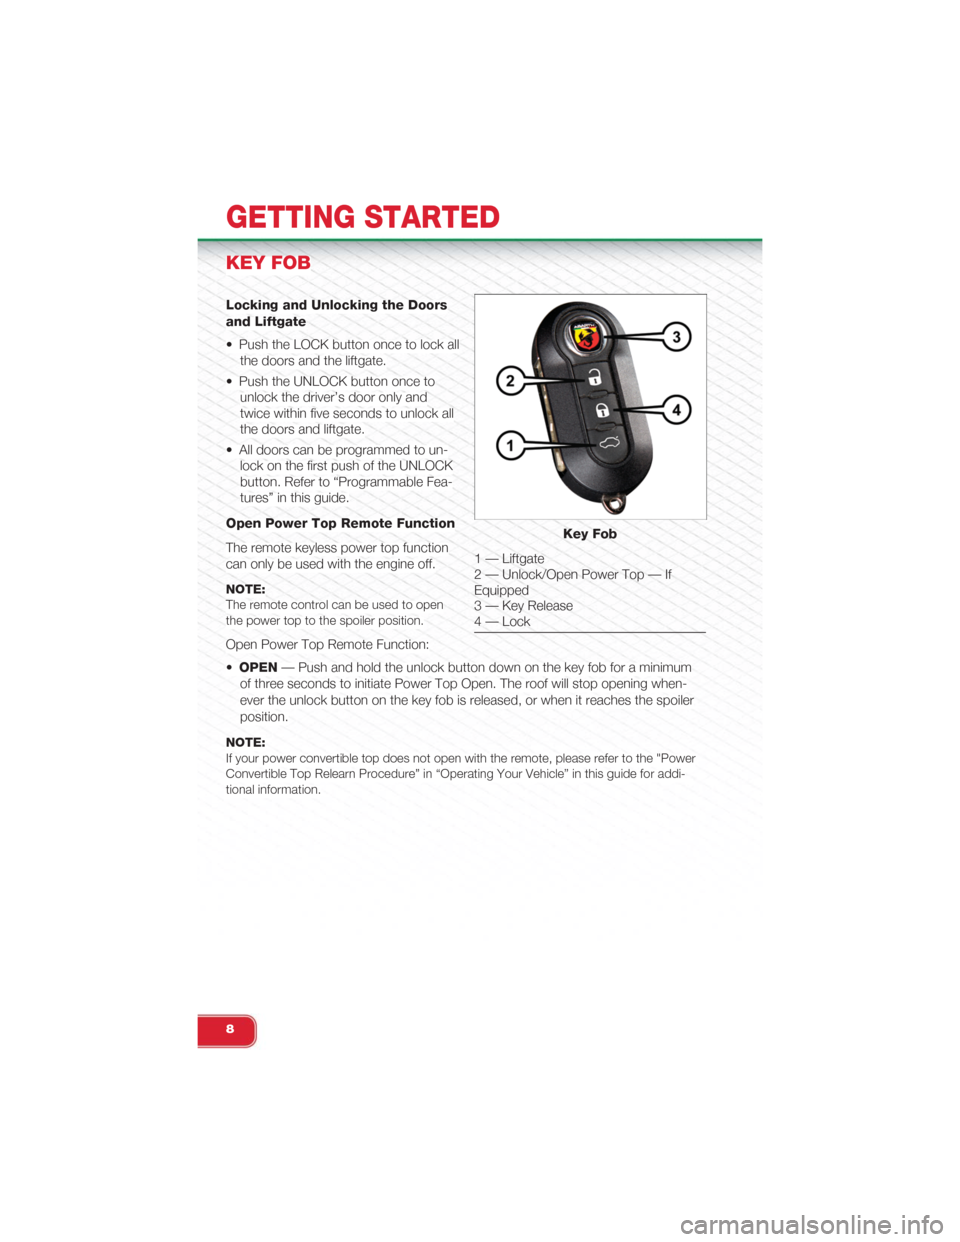 FIAT 500 ABARTH 2015 2.G User Guide KEY FOB
Locking and Unlocking the Doors
and Liftgate
• Push the LOCK button once to lock all
the doors and the liftgate.
• Push the UNLOCK button once to
unlock the driver’s door only and
twice 